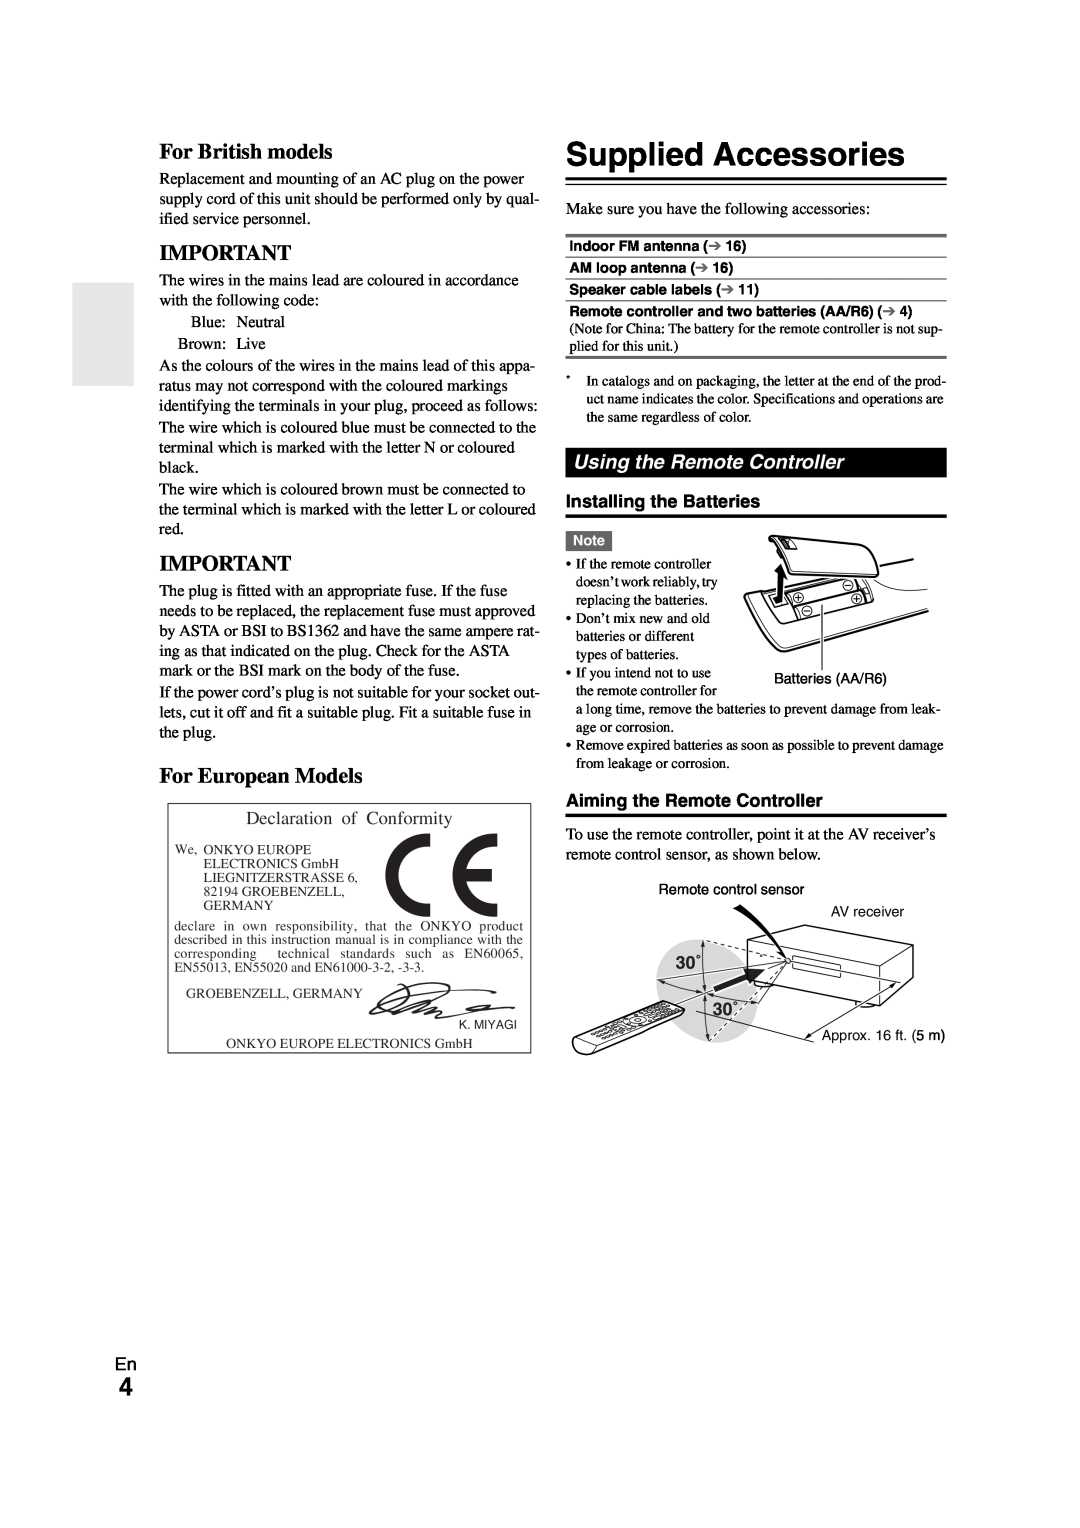 Onkyo SR308 instruction manual Supplied Accessories, For British models, For European Models, Using the Remote Controller 